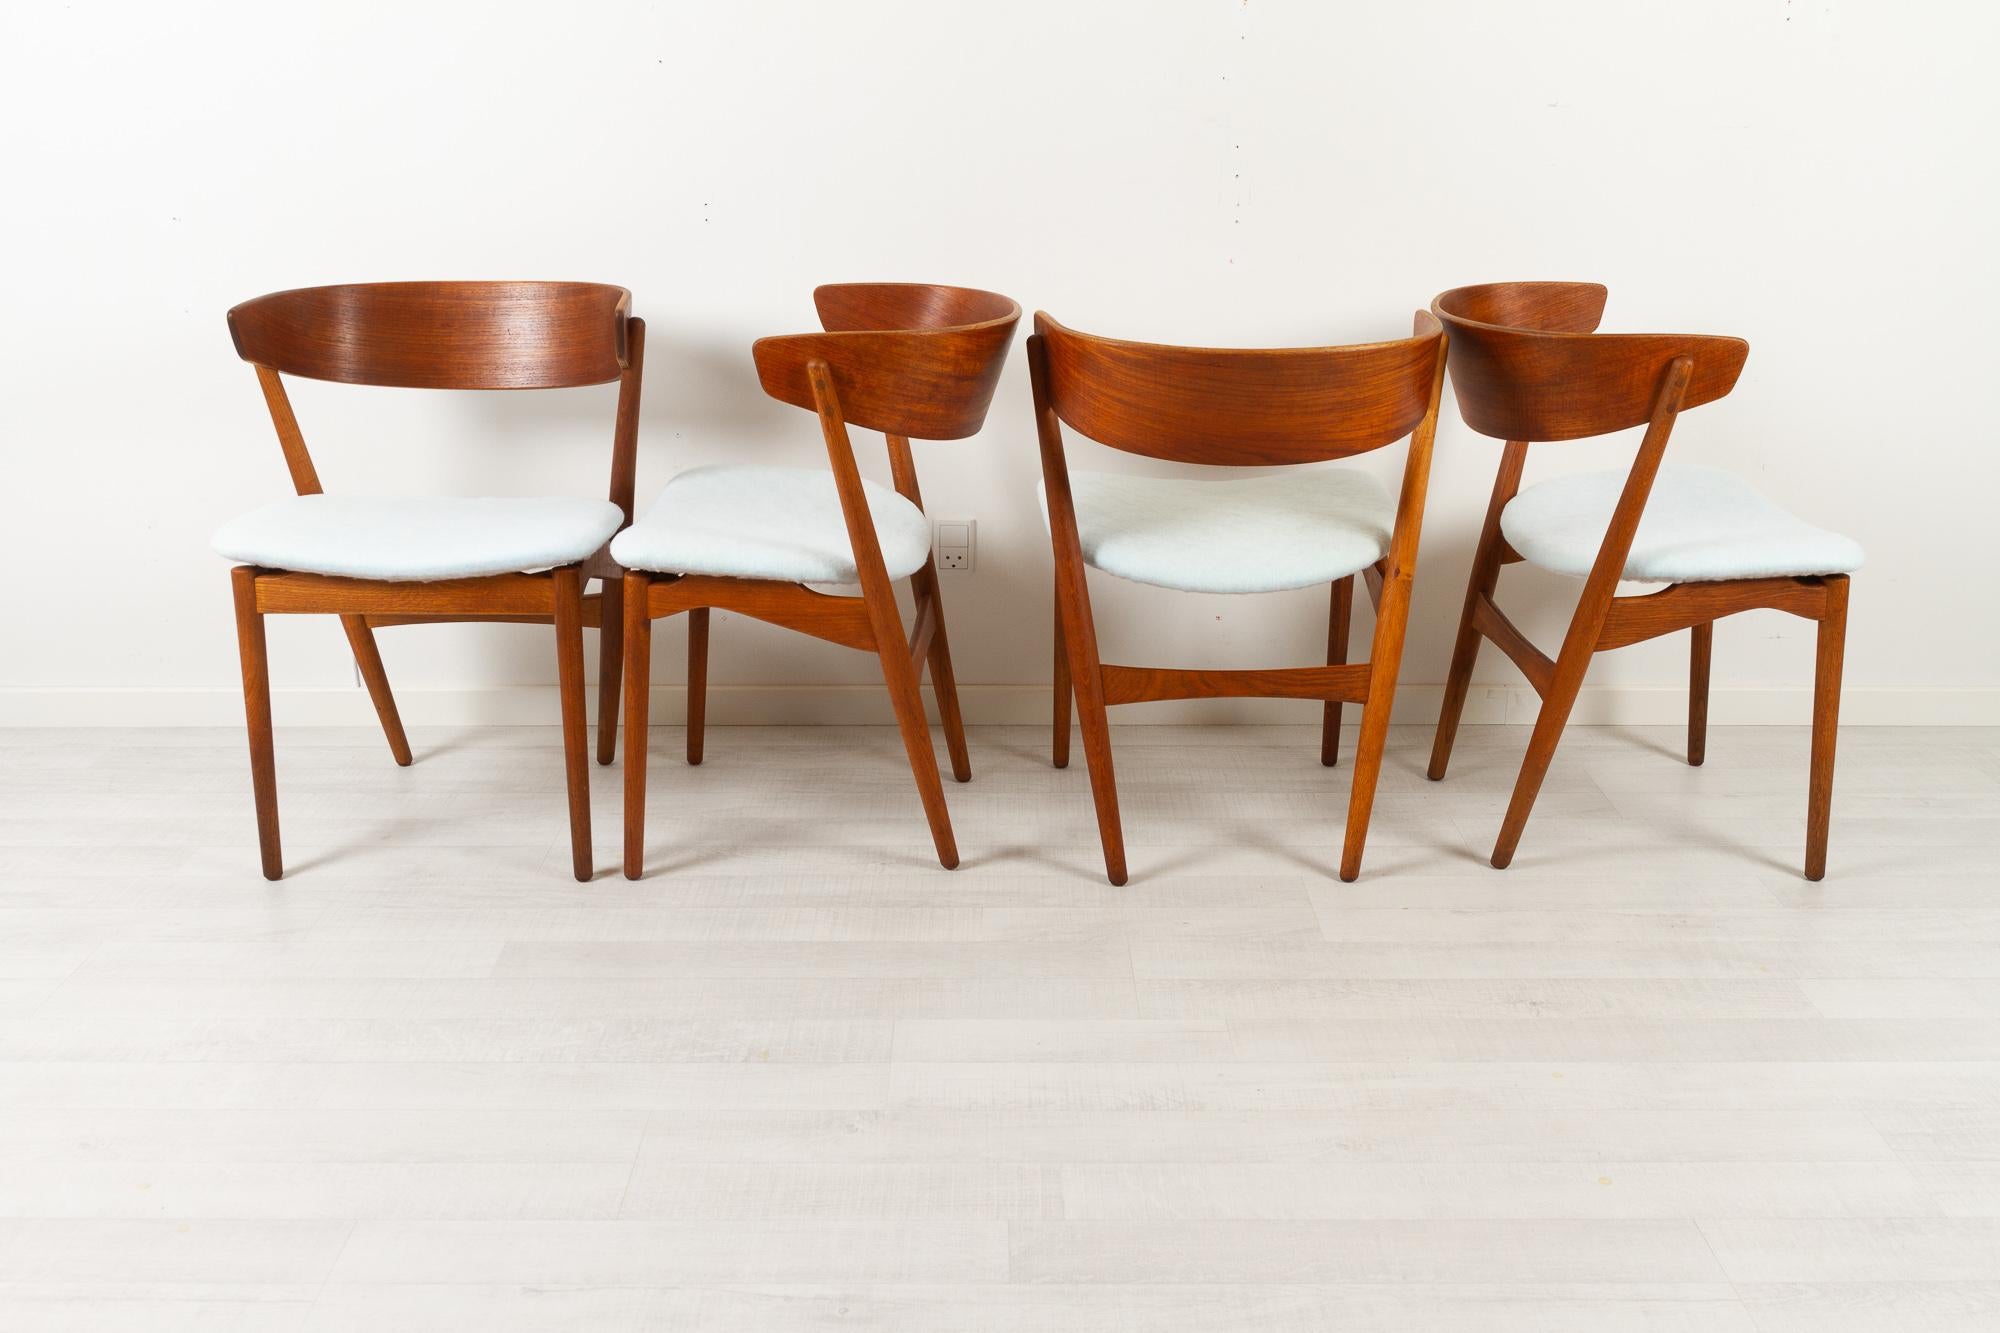 Vintage Danish Teak Dining Chairs No. 7 by Helge Sibast 1960s Set of 4 For Sale 10